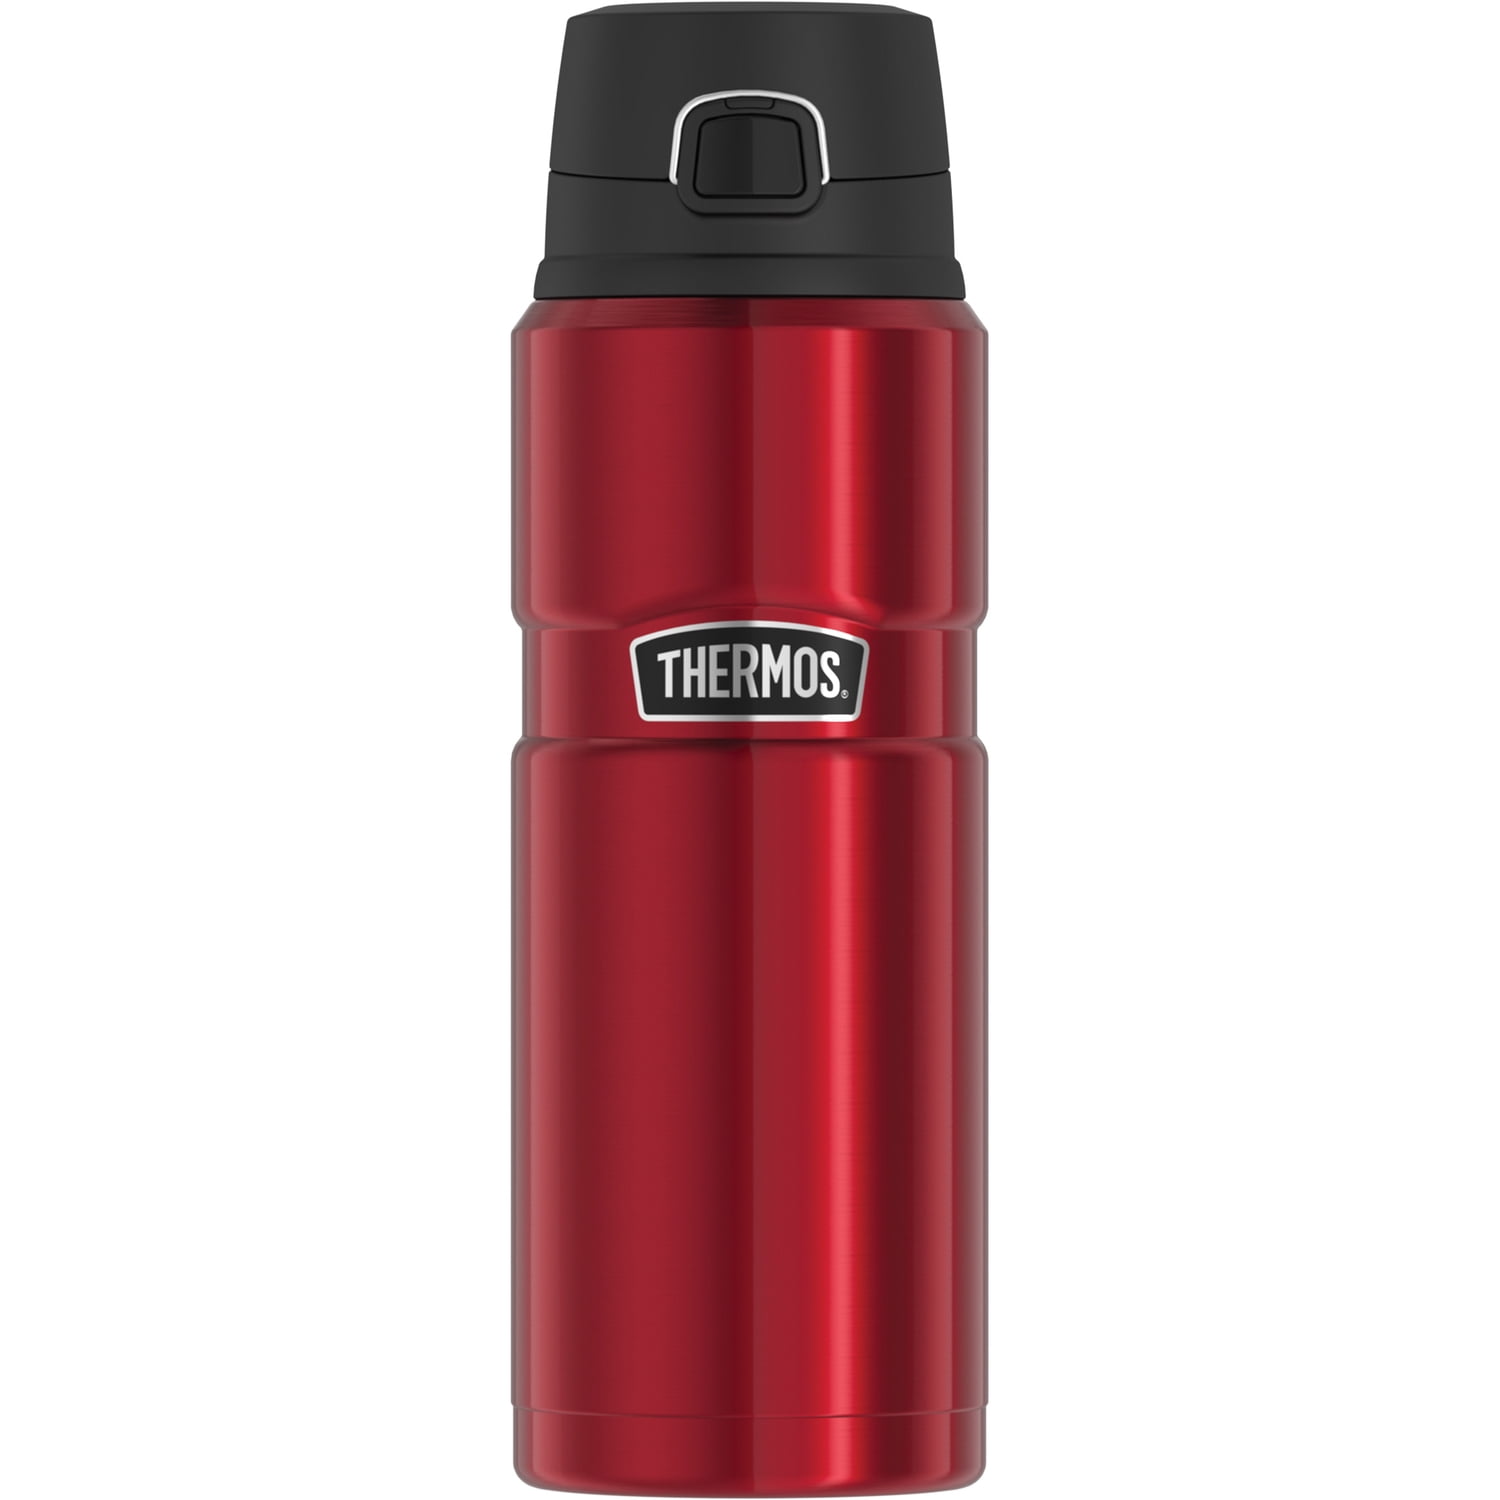 Stainless Steel Vacuum Insulated Bottle Water Drinks Flask Thermoses 500ML 0.5L 